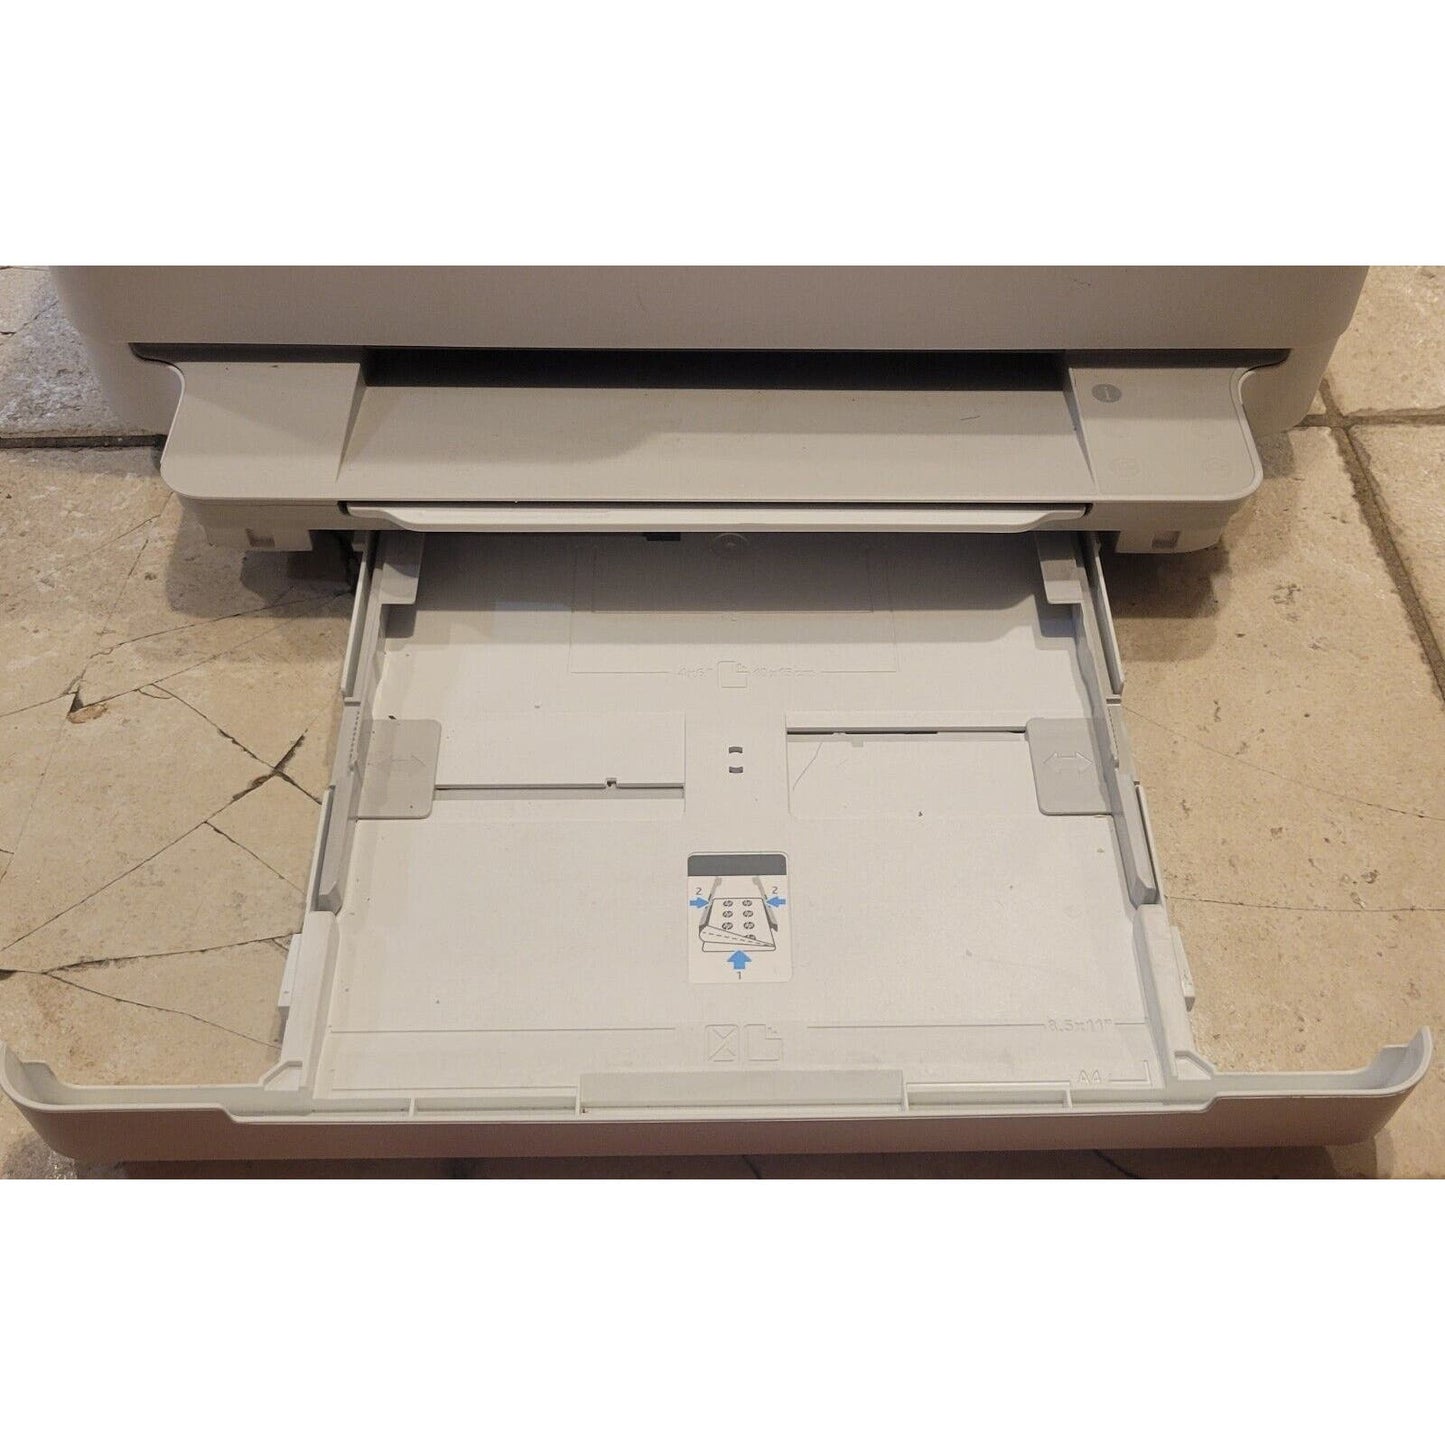 HP ENVY Pro 6455 All-in-One Color Inkjet Printer, Print, Scan, Copy, Fax